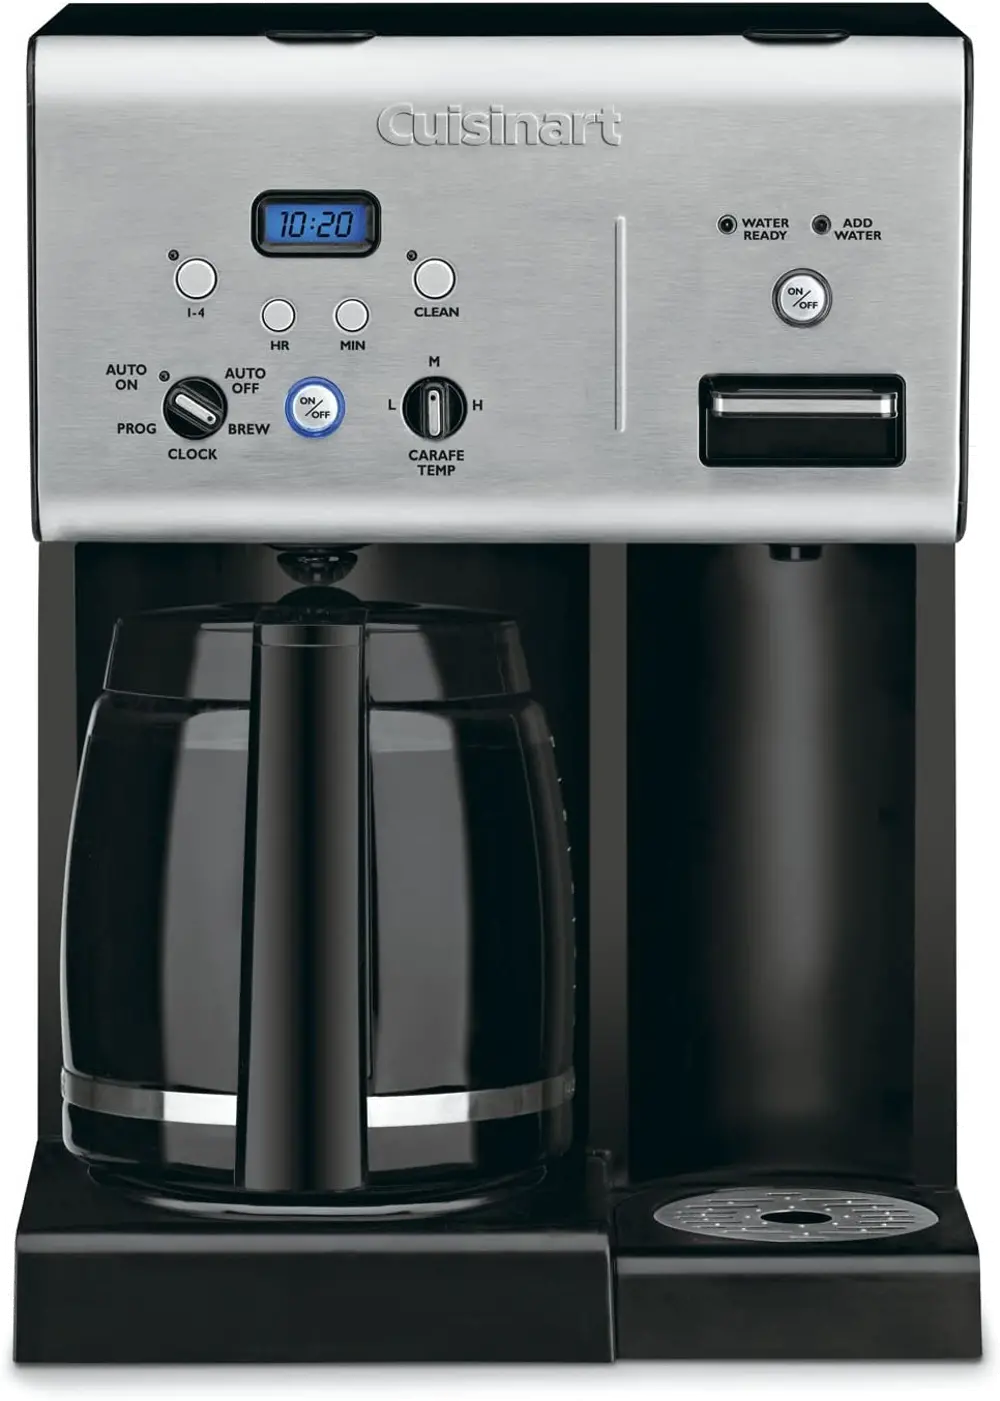 CHW-12P1 Cuisinart Coffee Plus 12 Cup Programmable Coffee Maker - Stainless Steel/Black-1